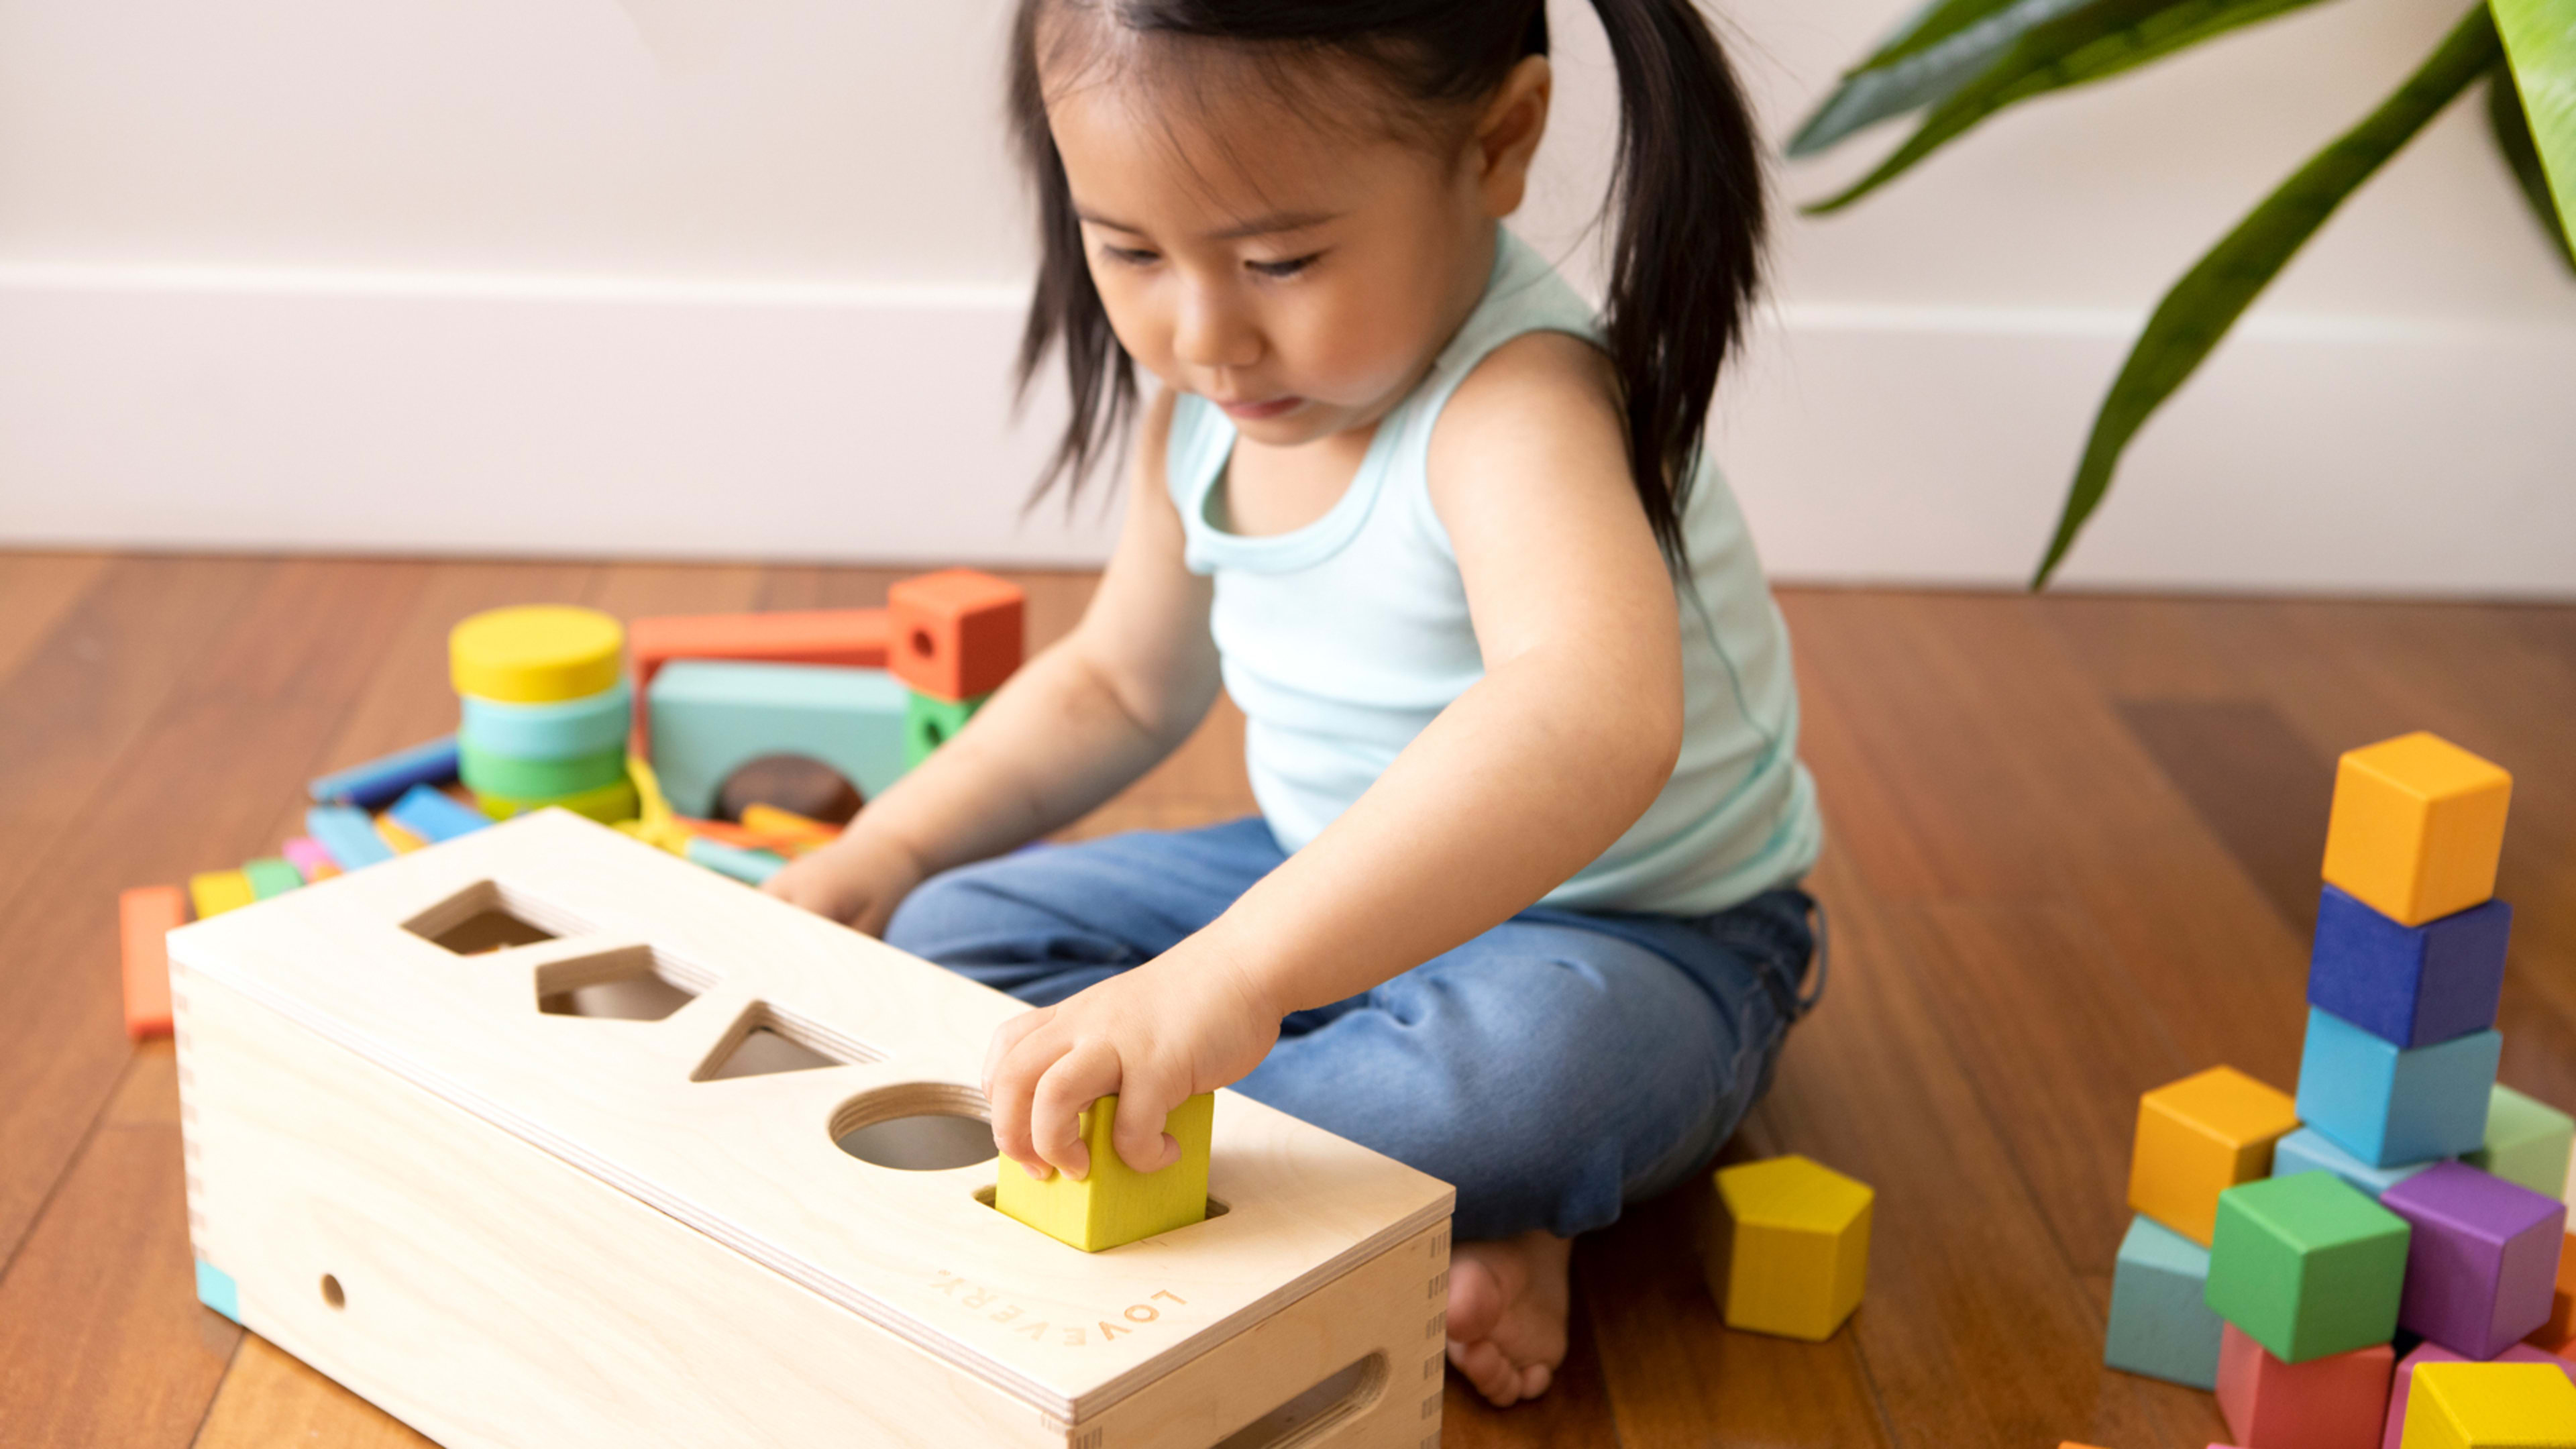 Silicon Valley’s biggest investors want your kids to play with these low-tech toys